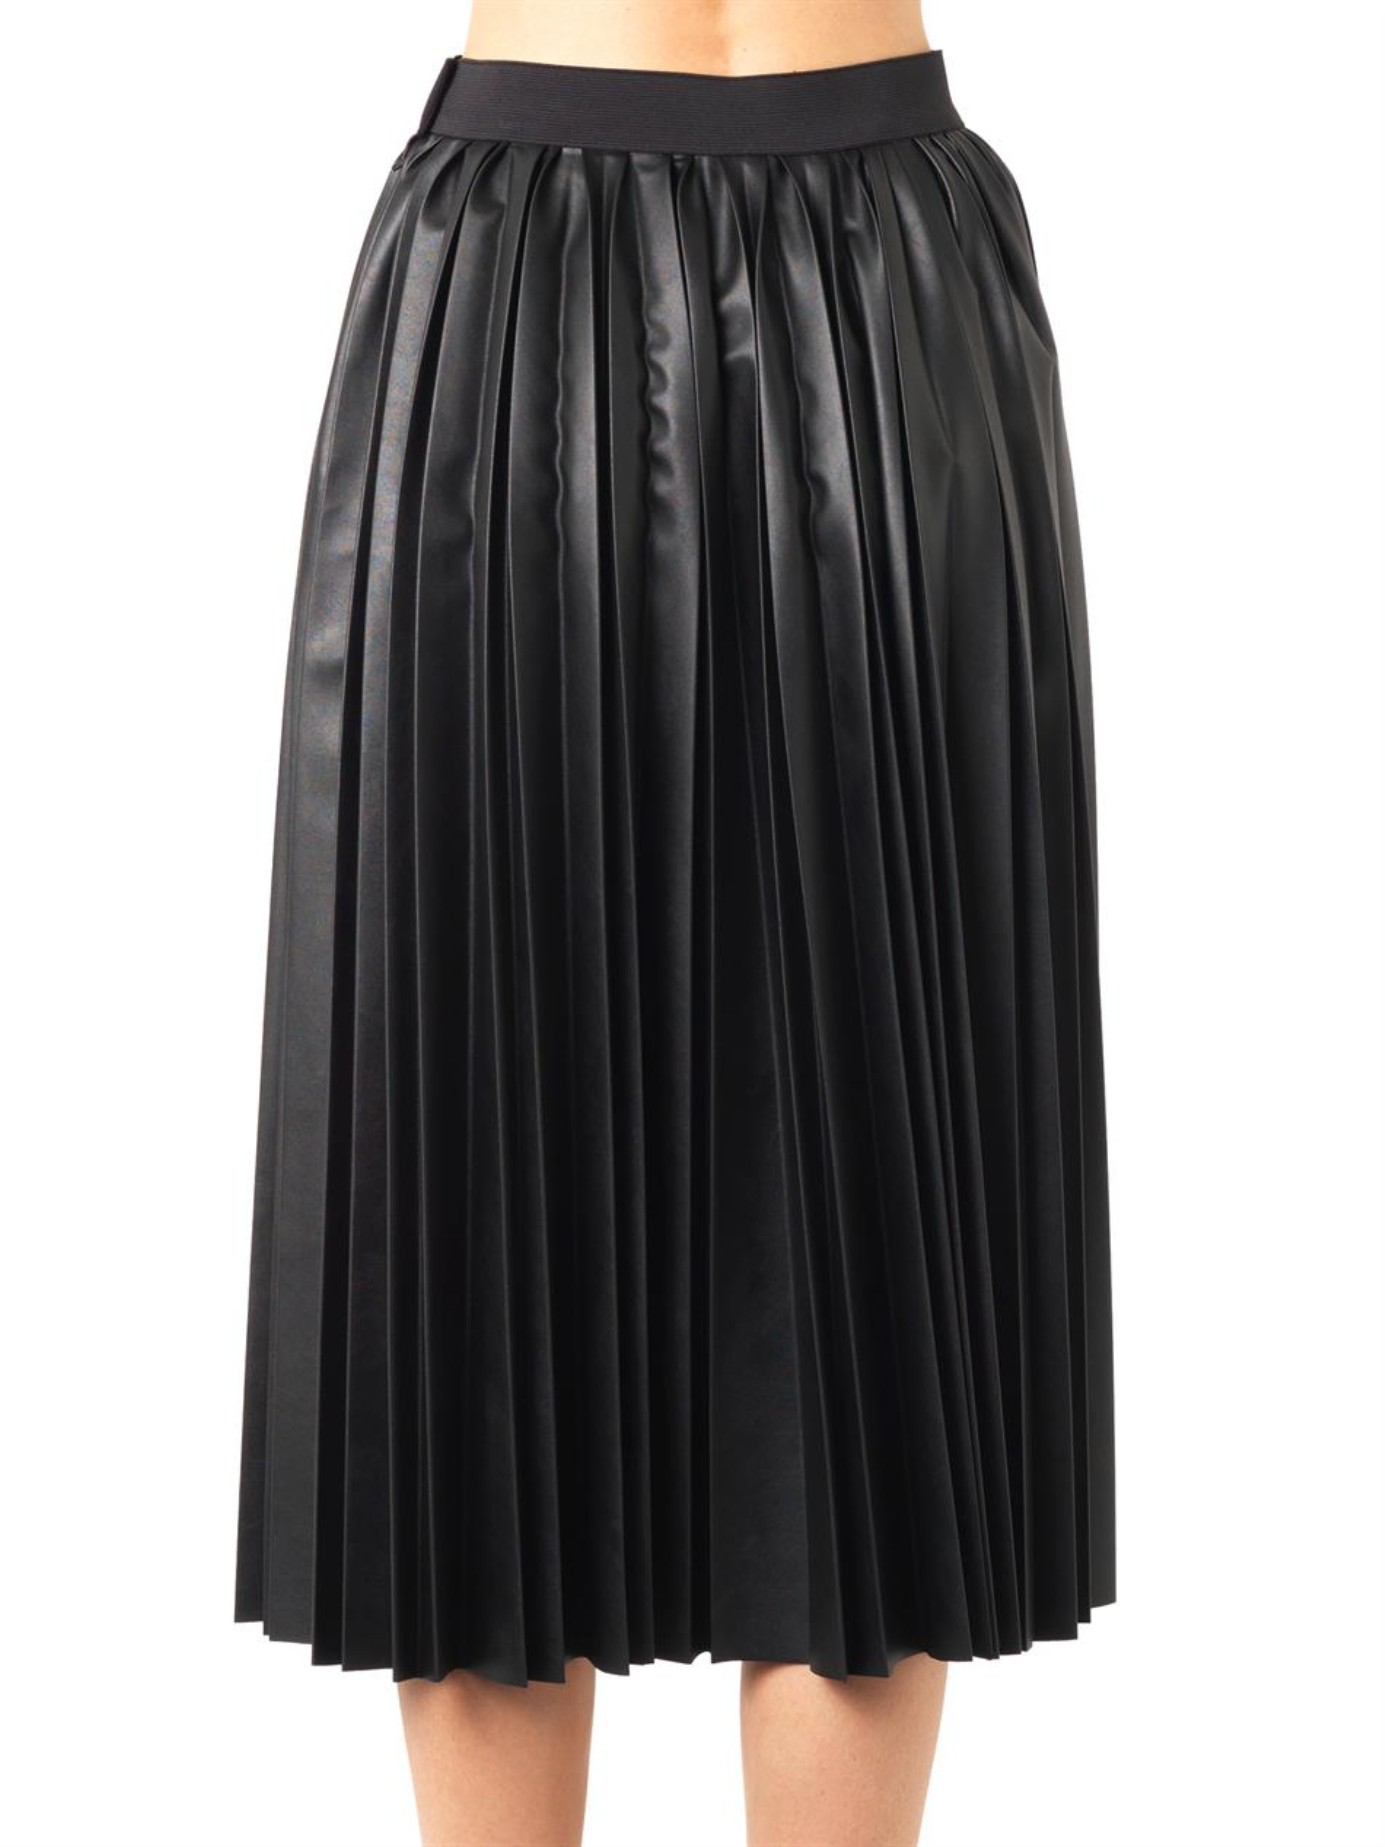 Lanvin Pleated Faux-leather Midi Skirt in Black | Lyst